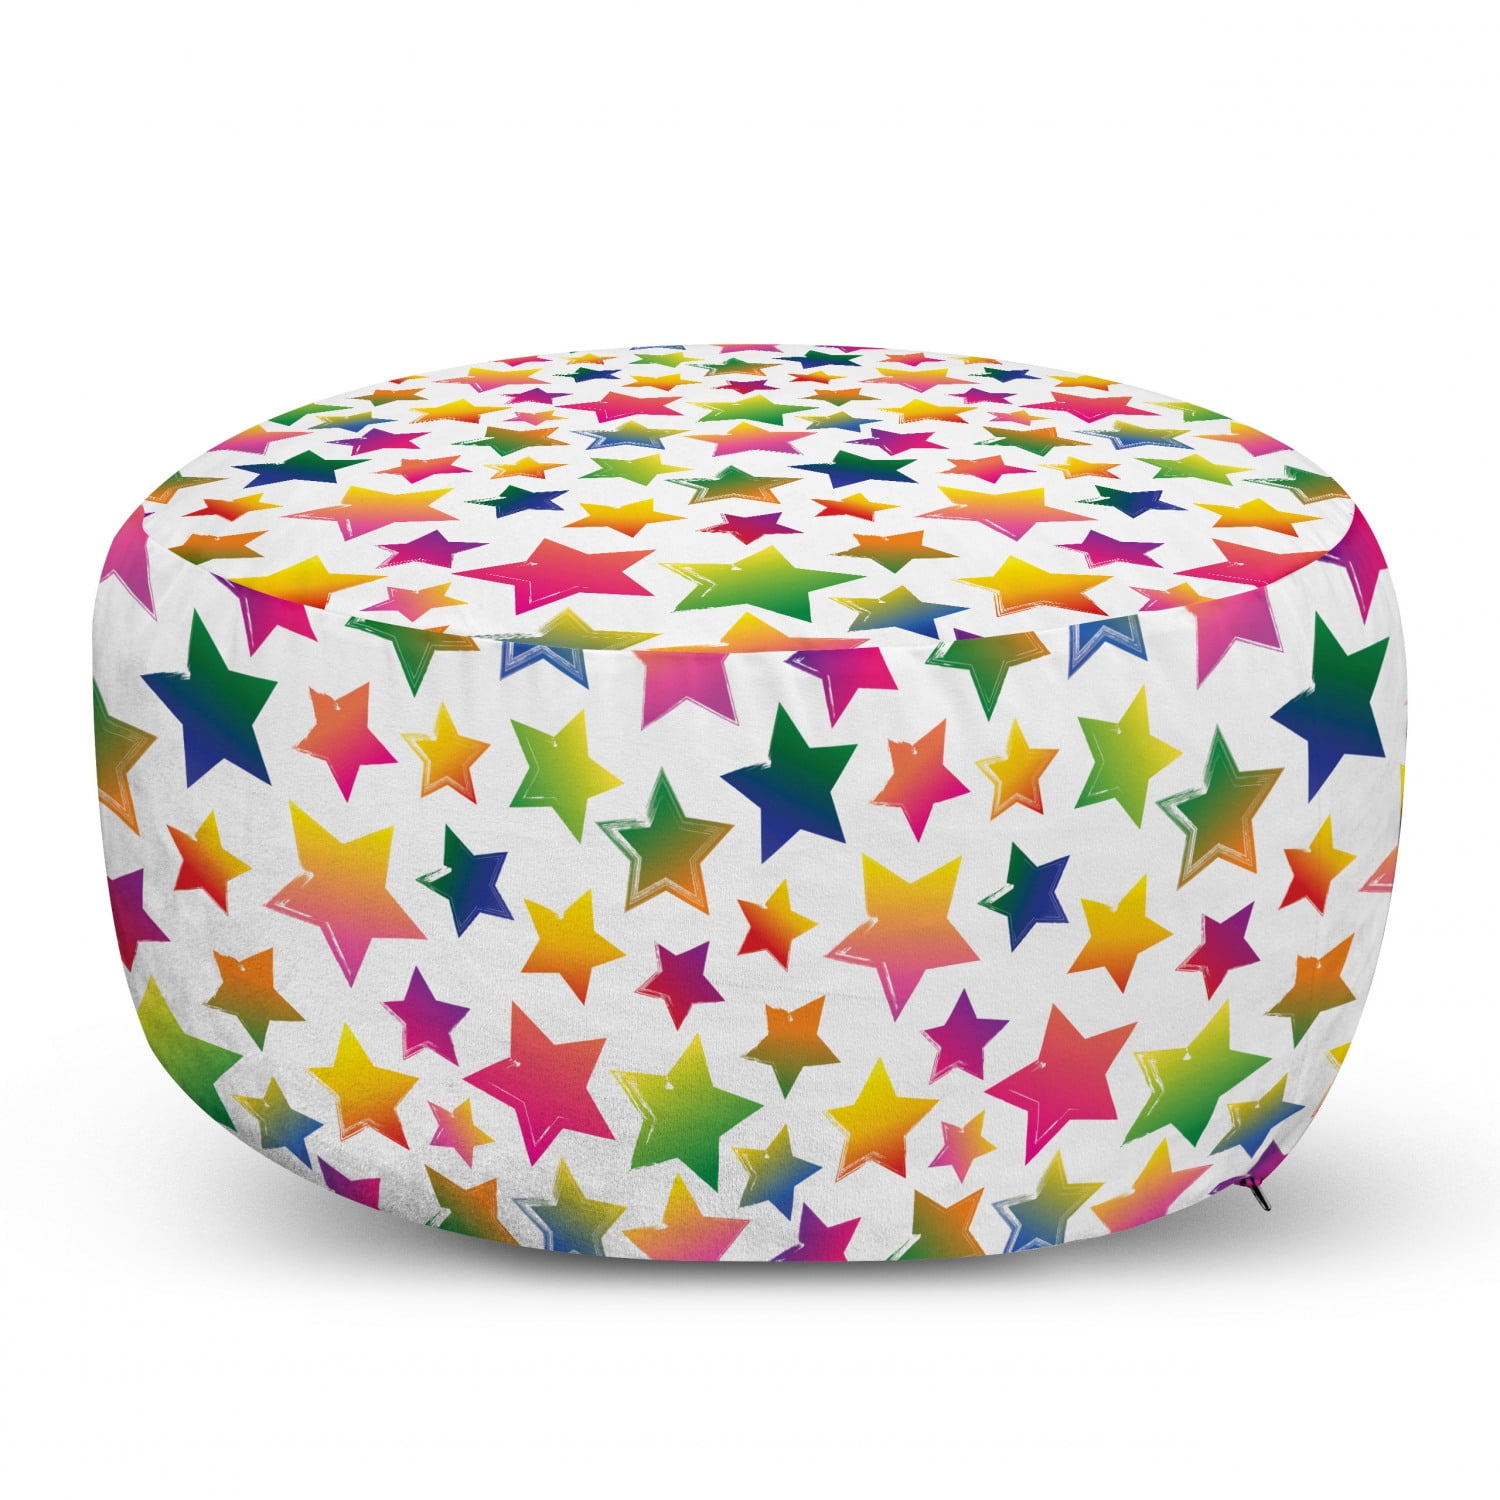 25 Ambesonne 1990s Rectangle Pouf Under Desk Foot Stool for Living Room Office Ottoman with Cover Multicolor Retro Style Geometric Shapes Triangles Angled Lines Hearts Colorful Illustration